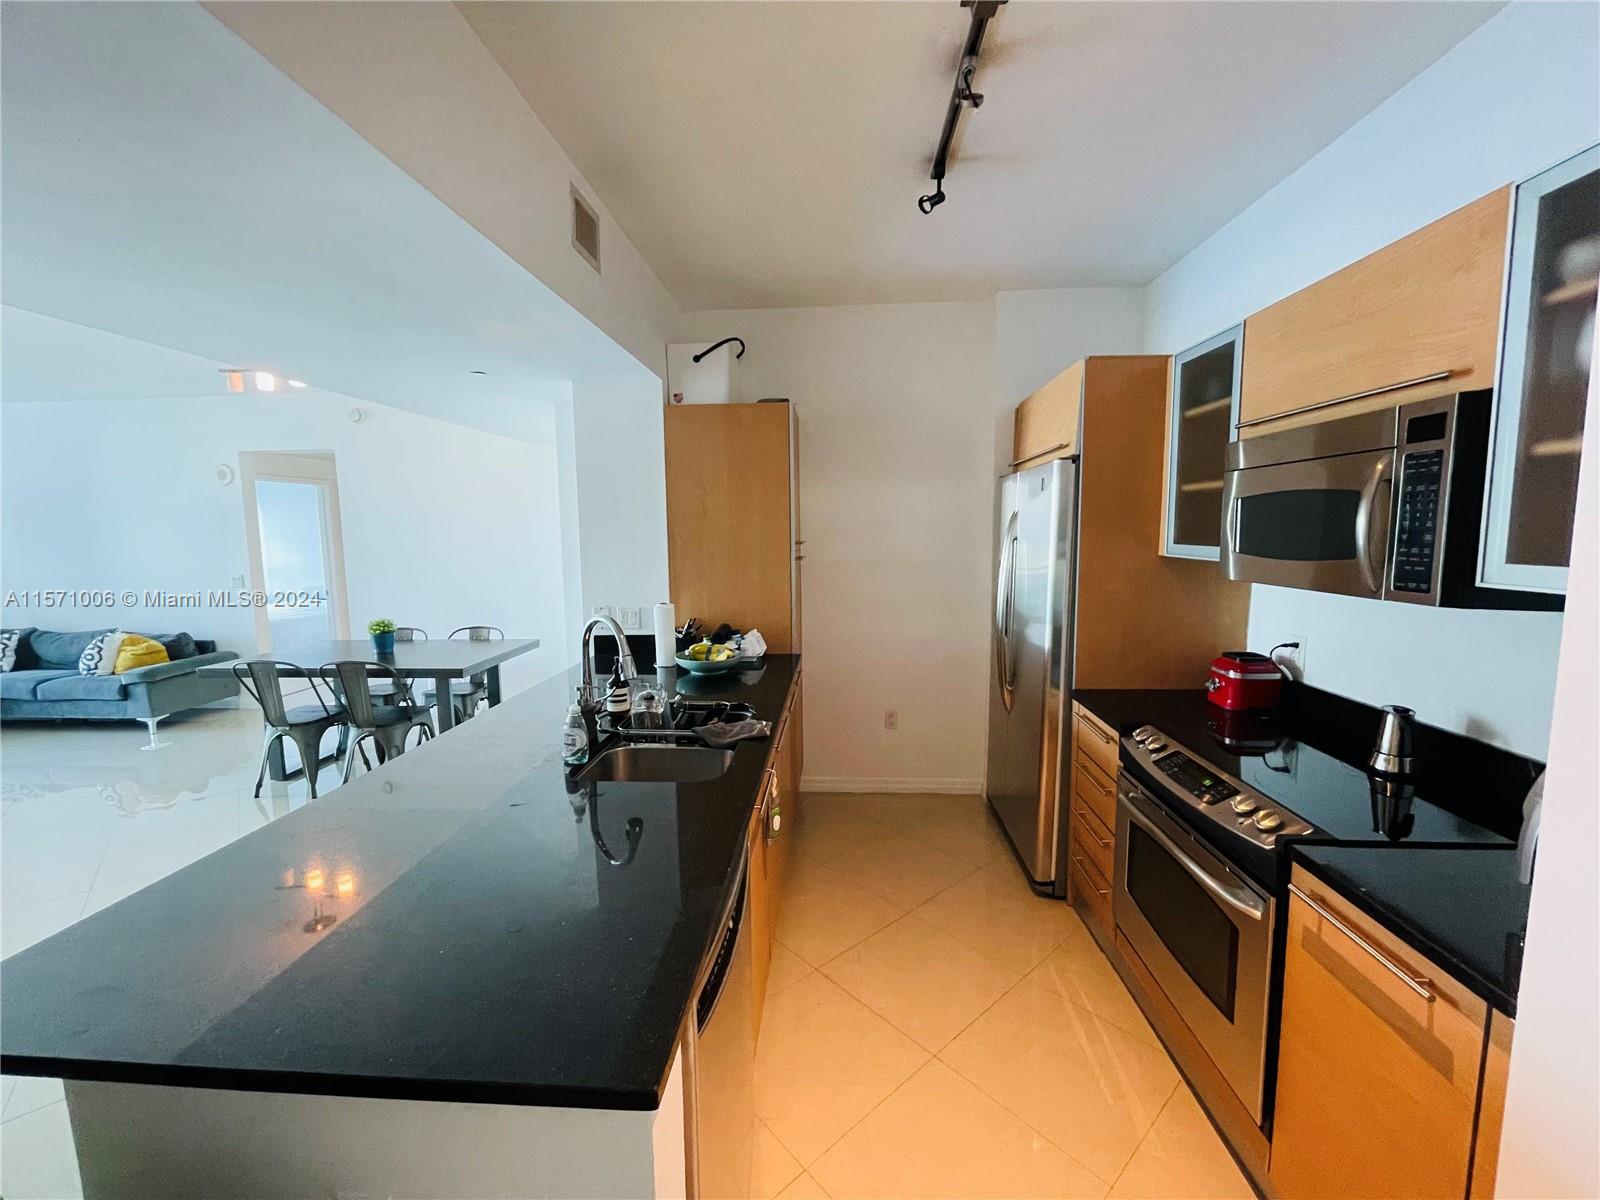 951  Brickell Ave #2105 For Sale A11571006, FL